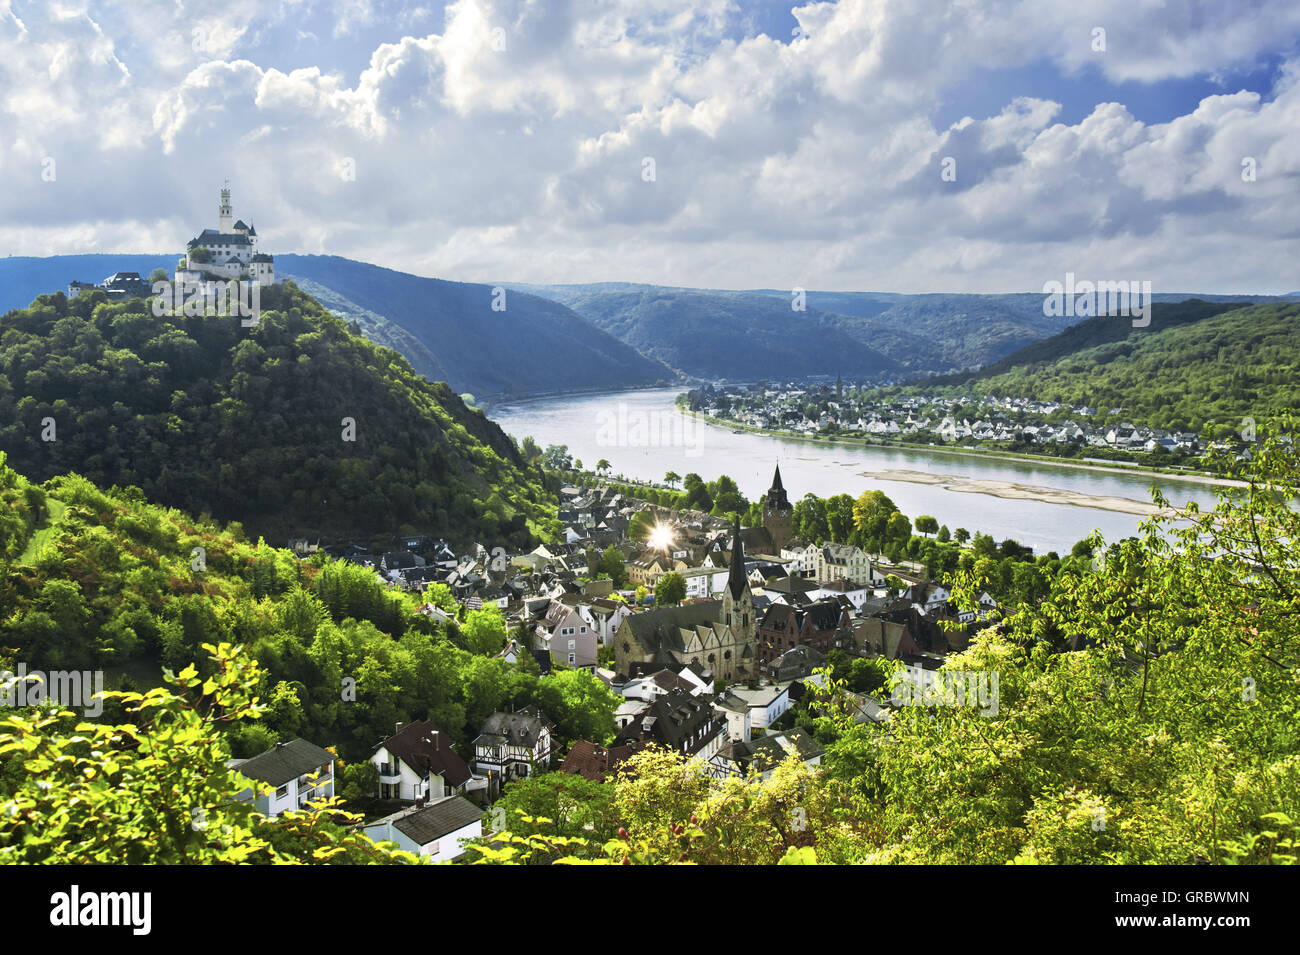 Castle Marksburg, The Town Braubach And The Rhine Gorge, Upper Middle Rhine Valley, Germany Stock Photo